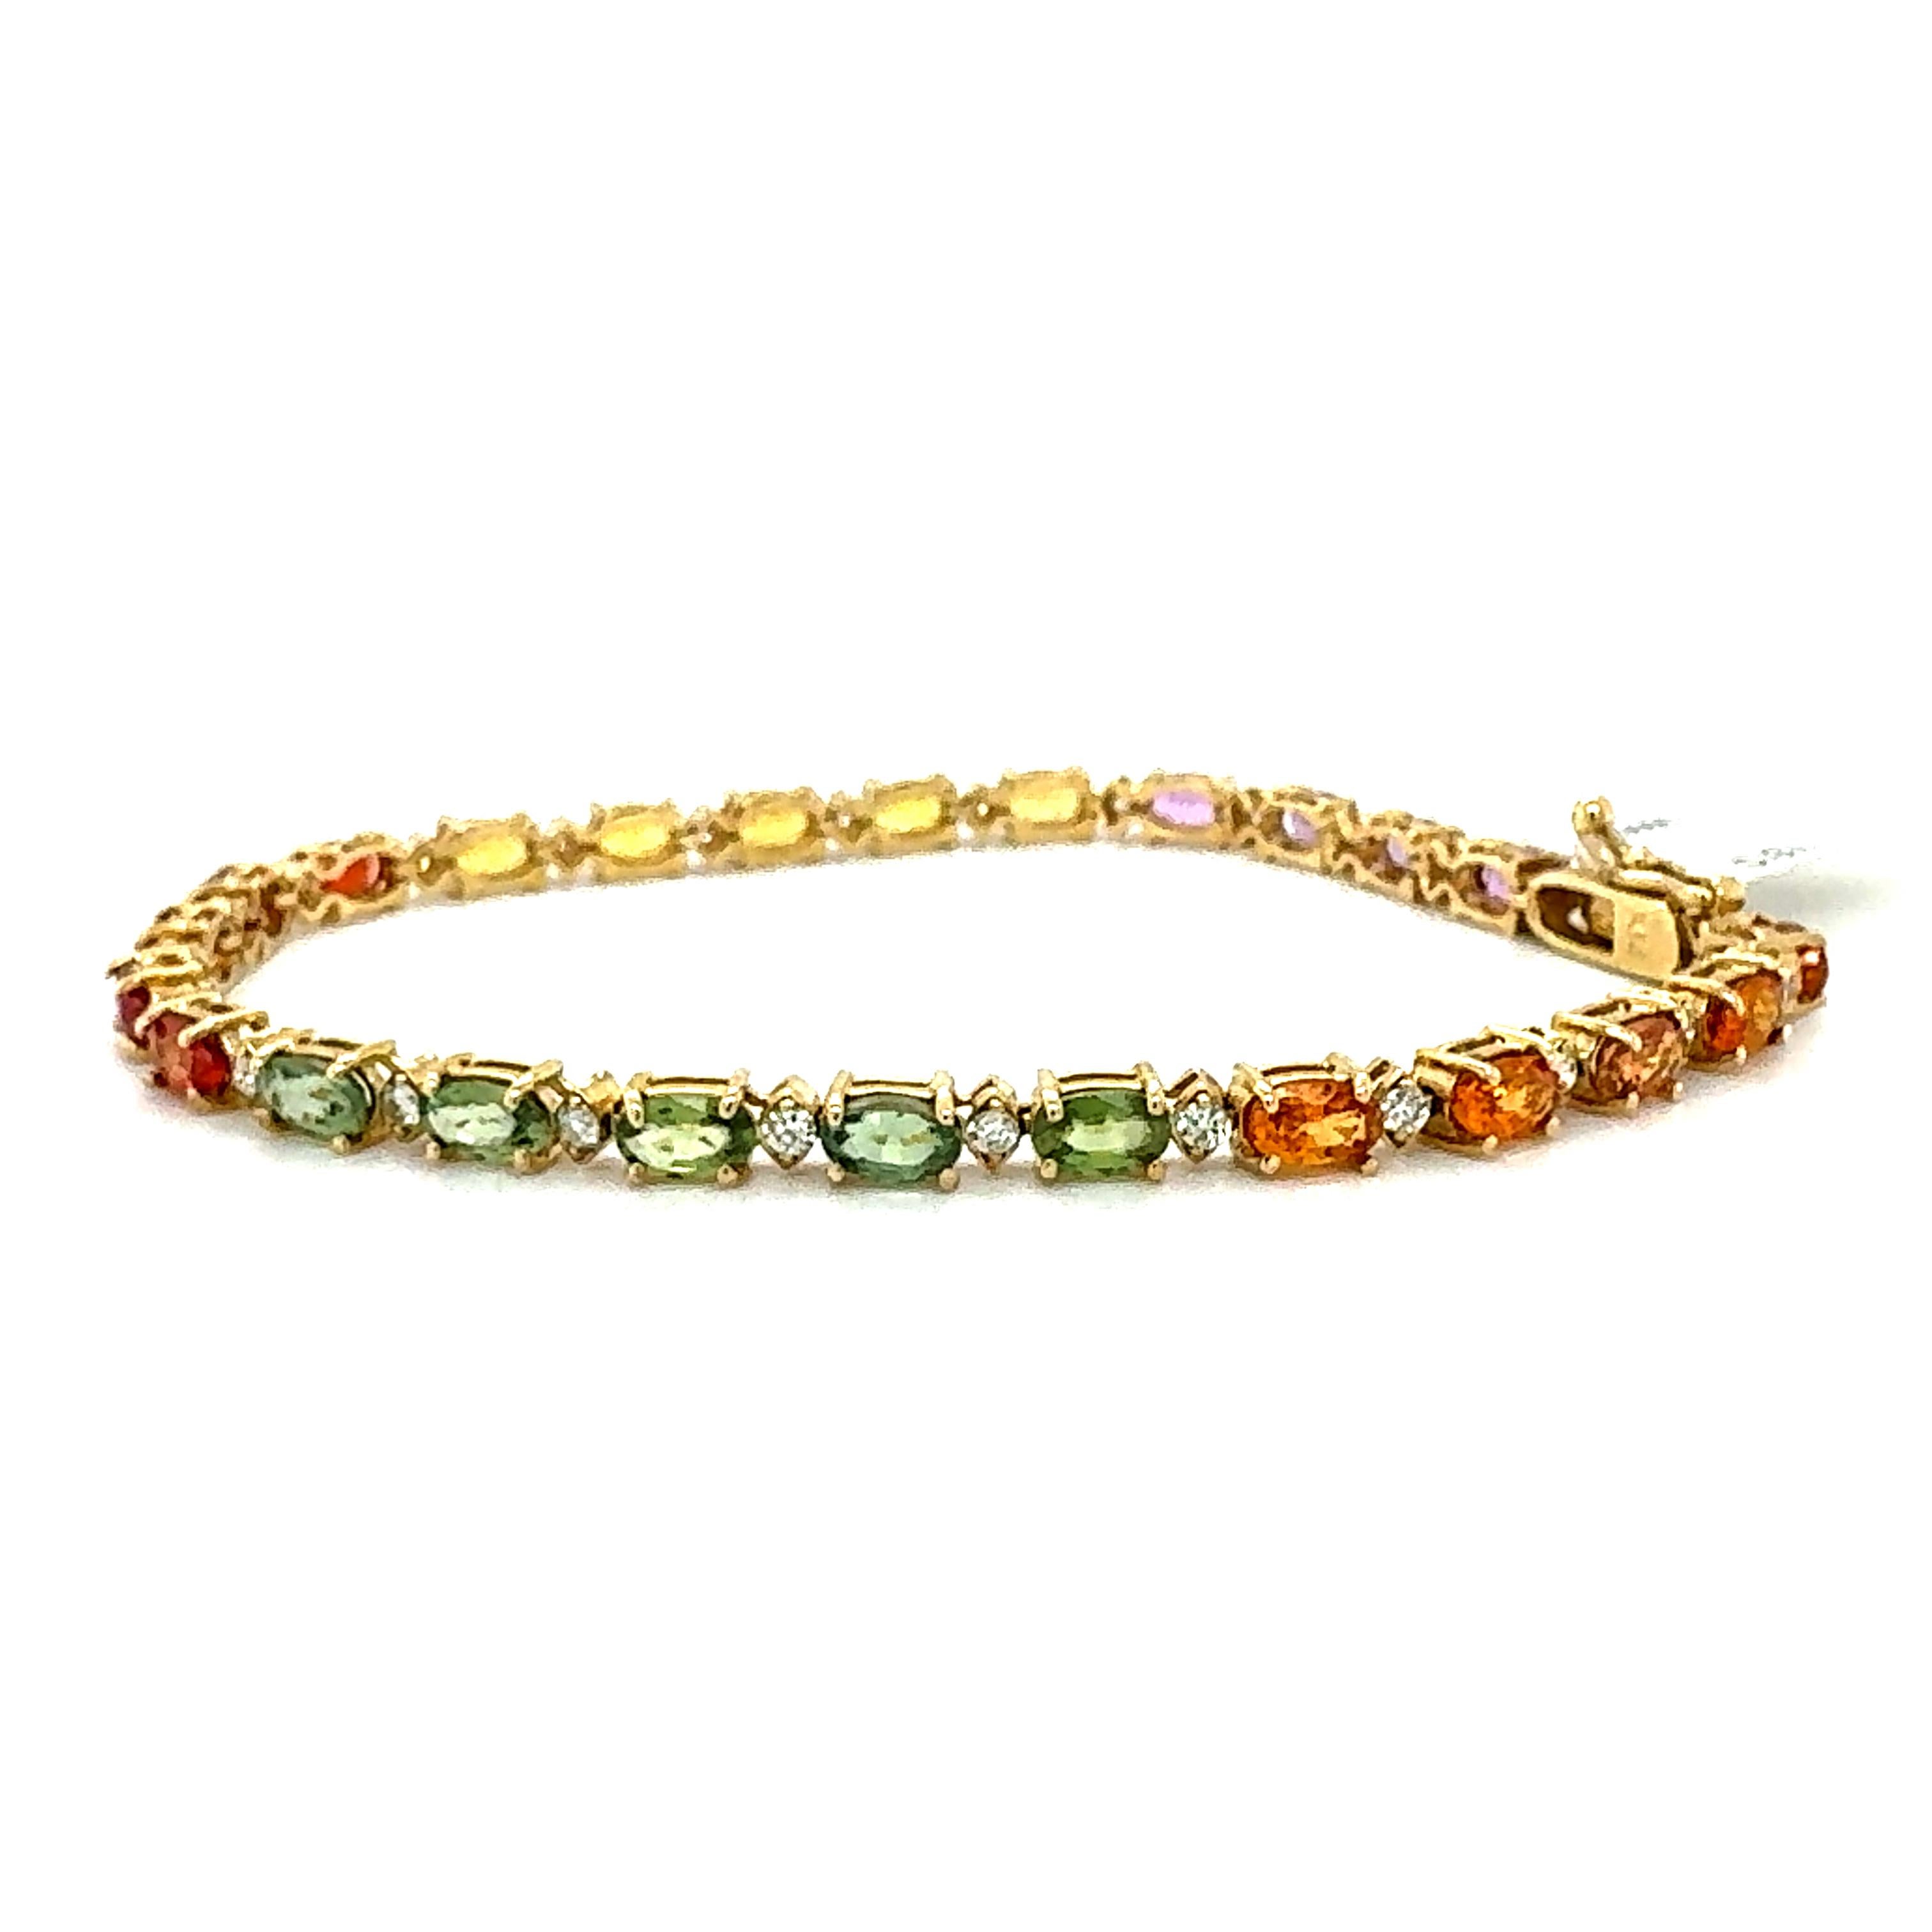 Beautifully designed 8.83 Carat Multi-Color Sapphire and Diamond Yellow Gold Tennis Bracelet.  This gorgeous piece has 25 Oval Cut Multi-Color Sapphires that weigh 8.19 Carats and 25 Round Cut Diamonds that weigh 0.64 carats The clarity and color of